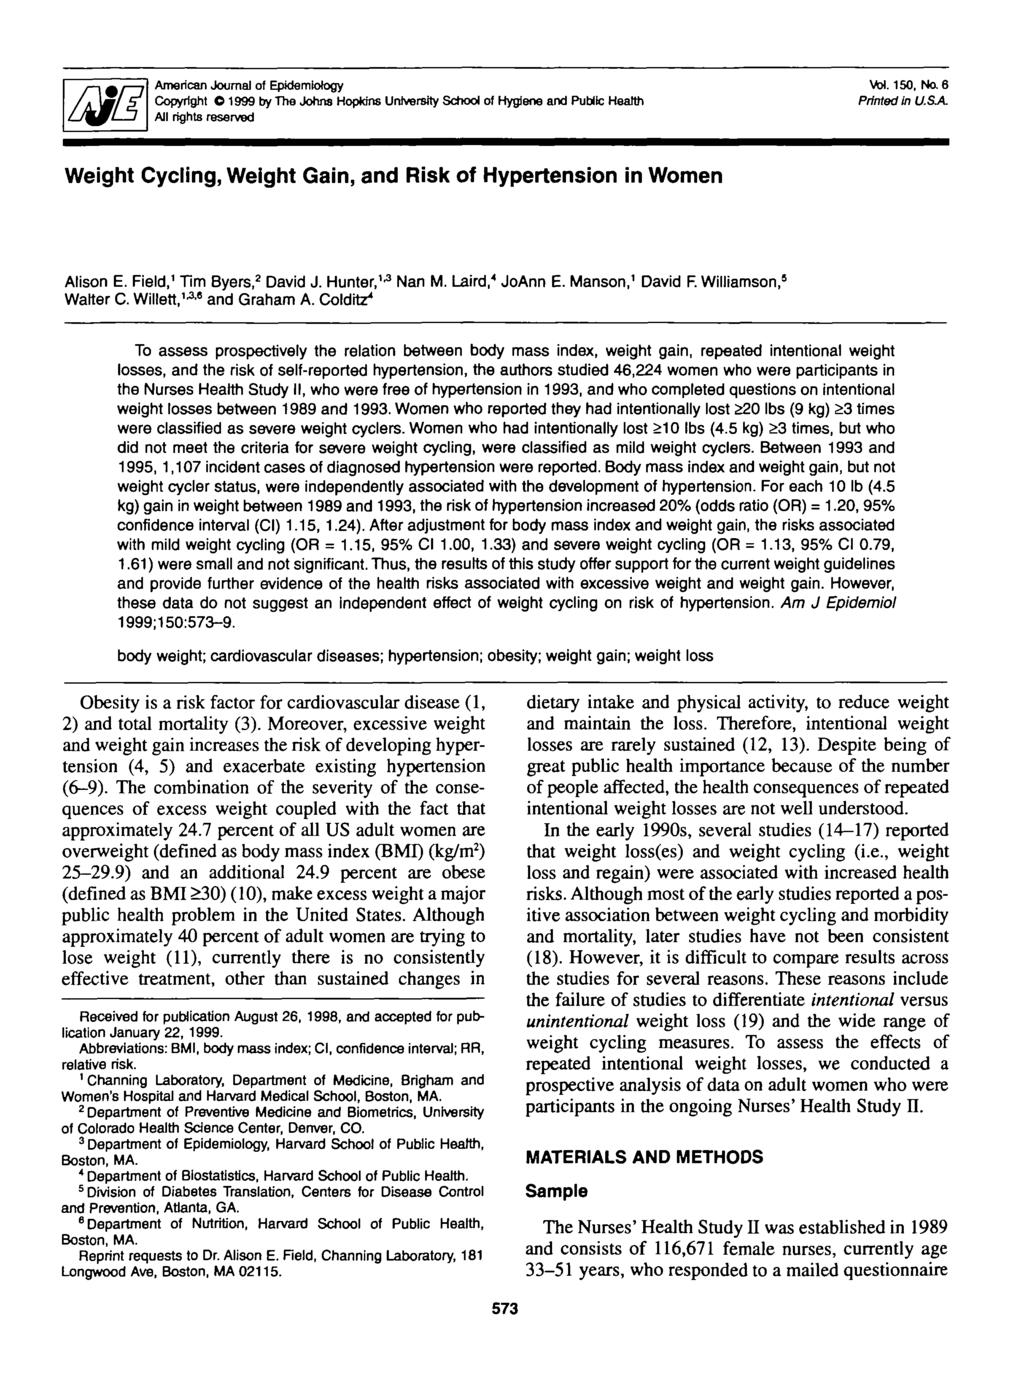 American Journal of Epidemiology Copyright 01999 by The Johns Hopkins University School of Hygiene and Public Health All rights reserved Vol.150, No. 6 Printed In USA.